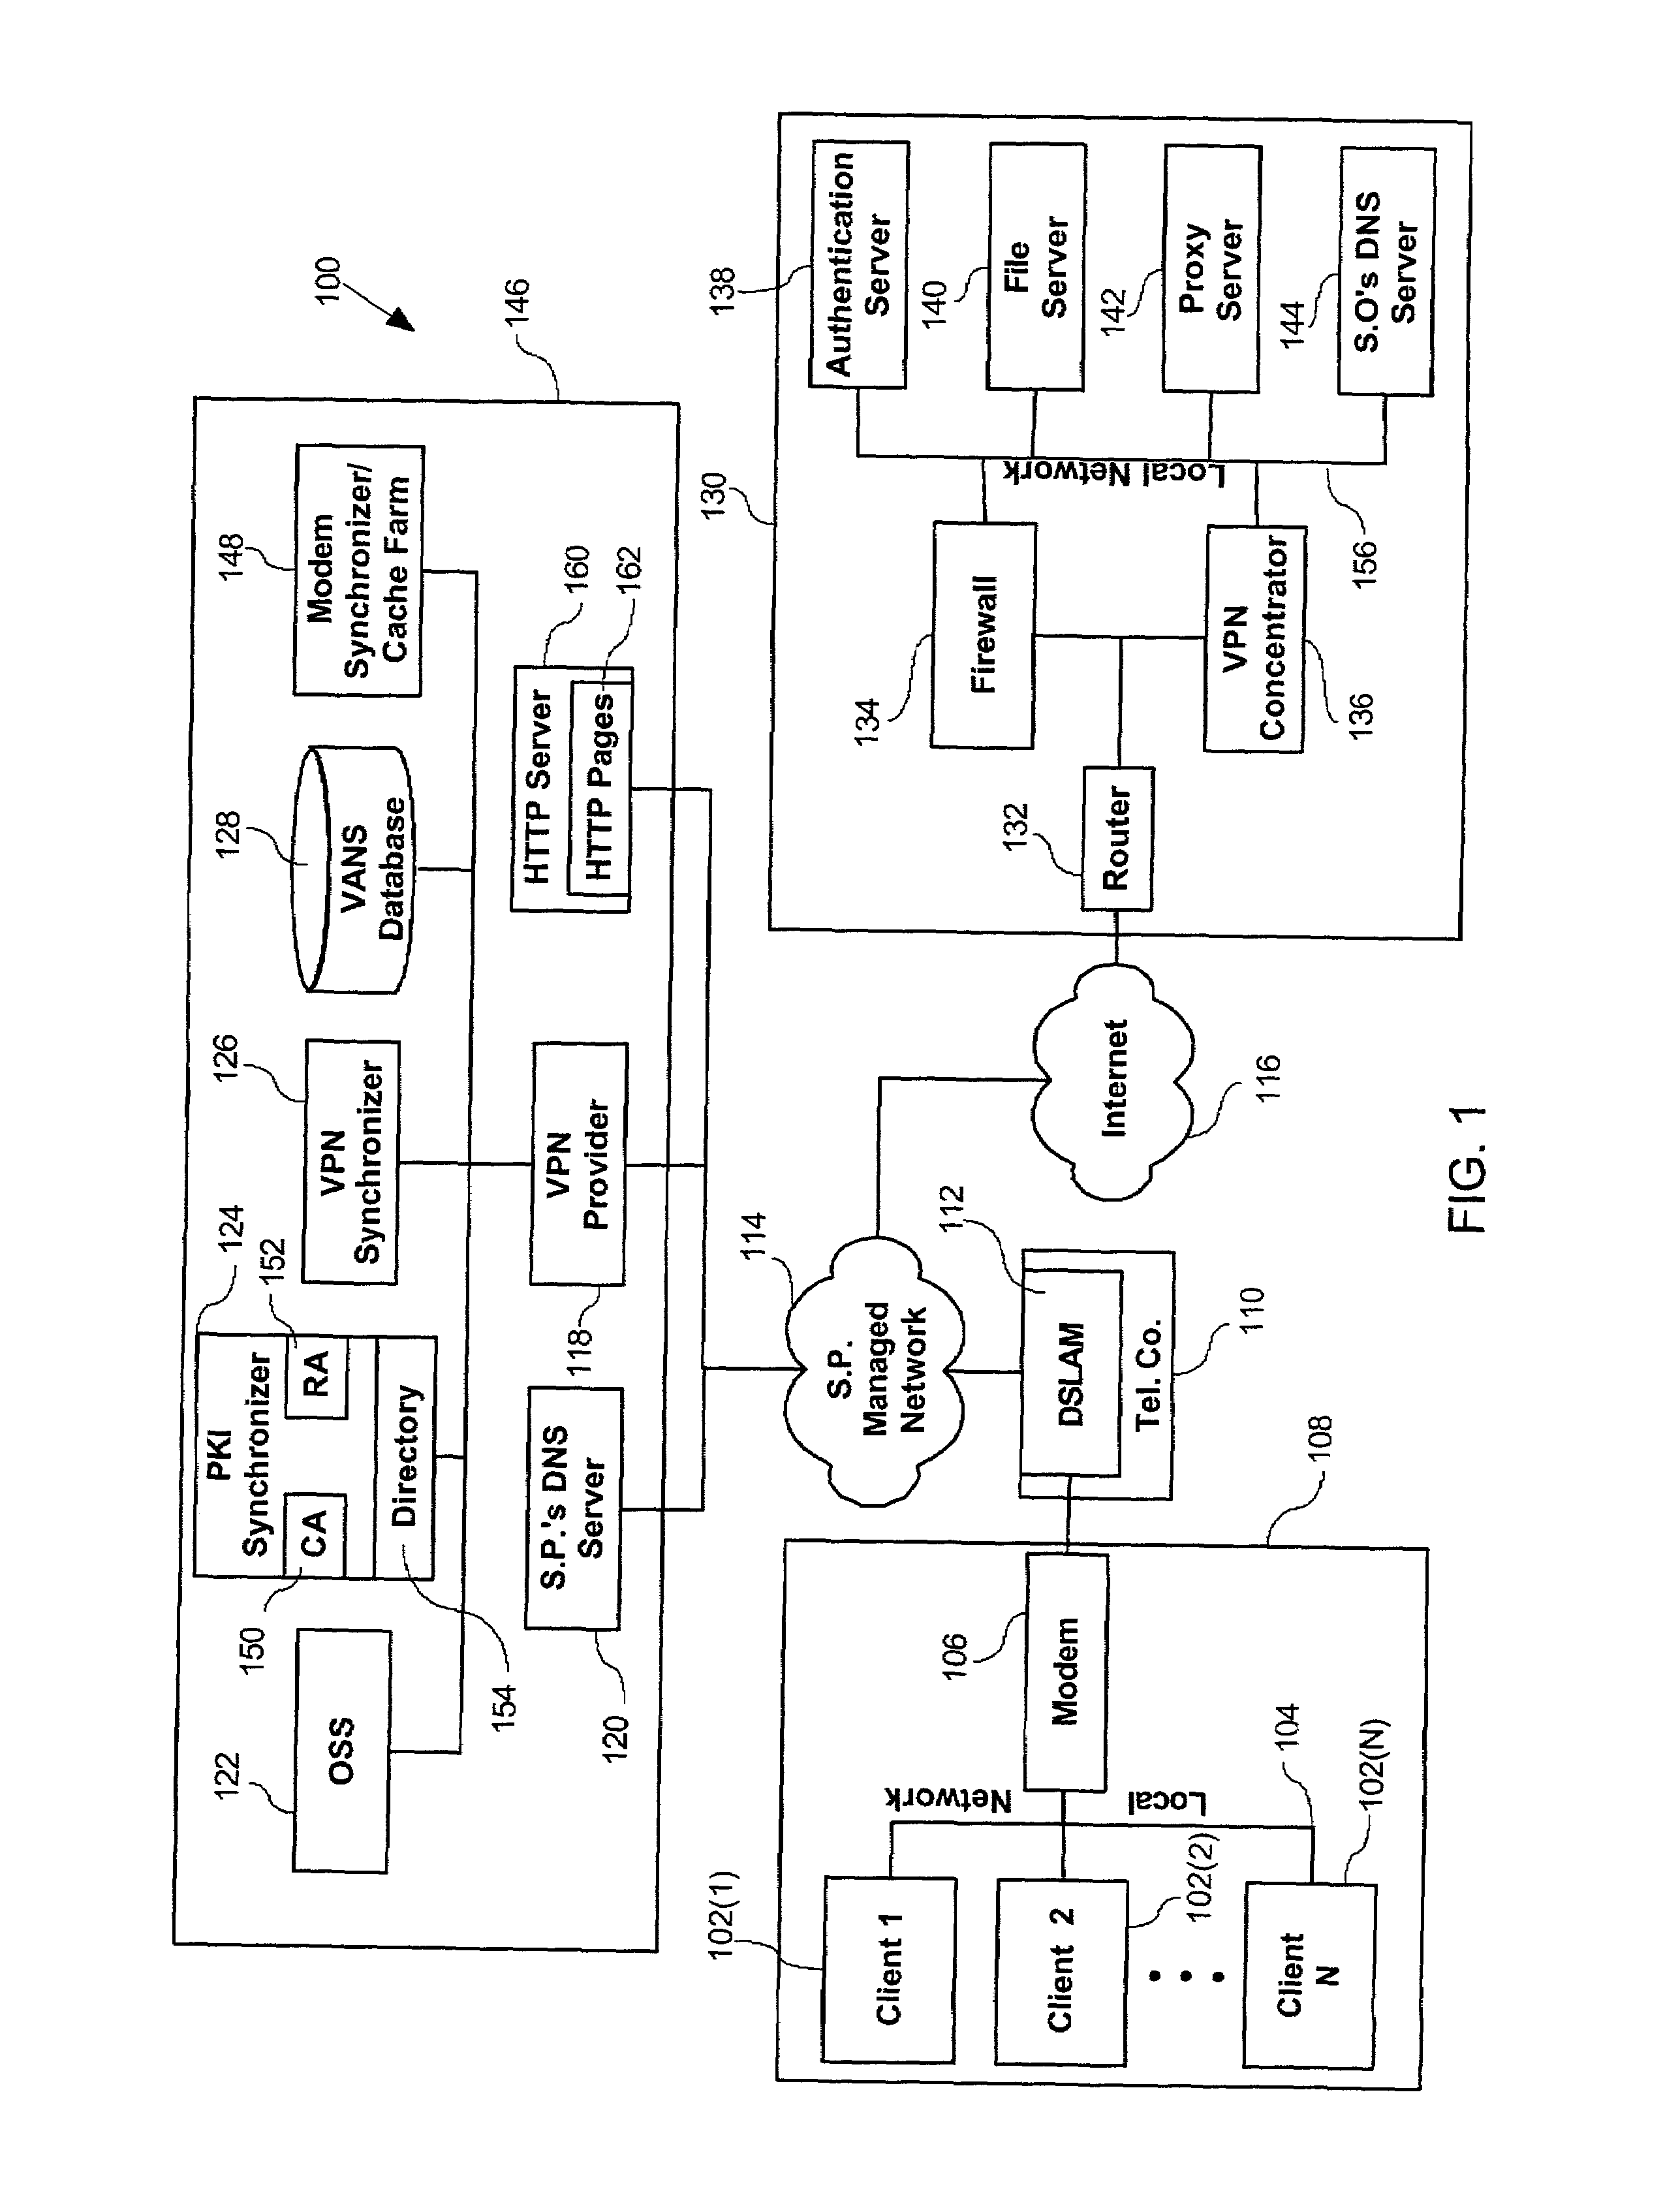 Automated configuration of a virtual private network